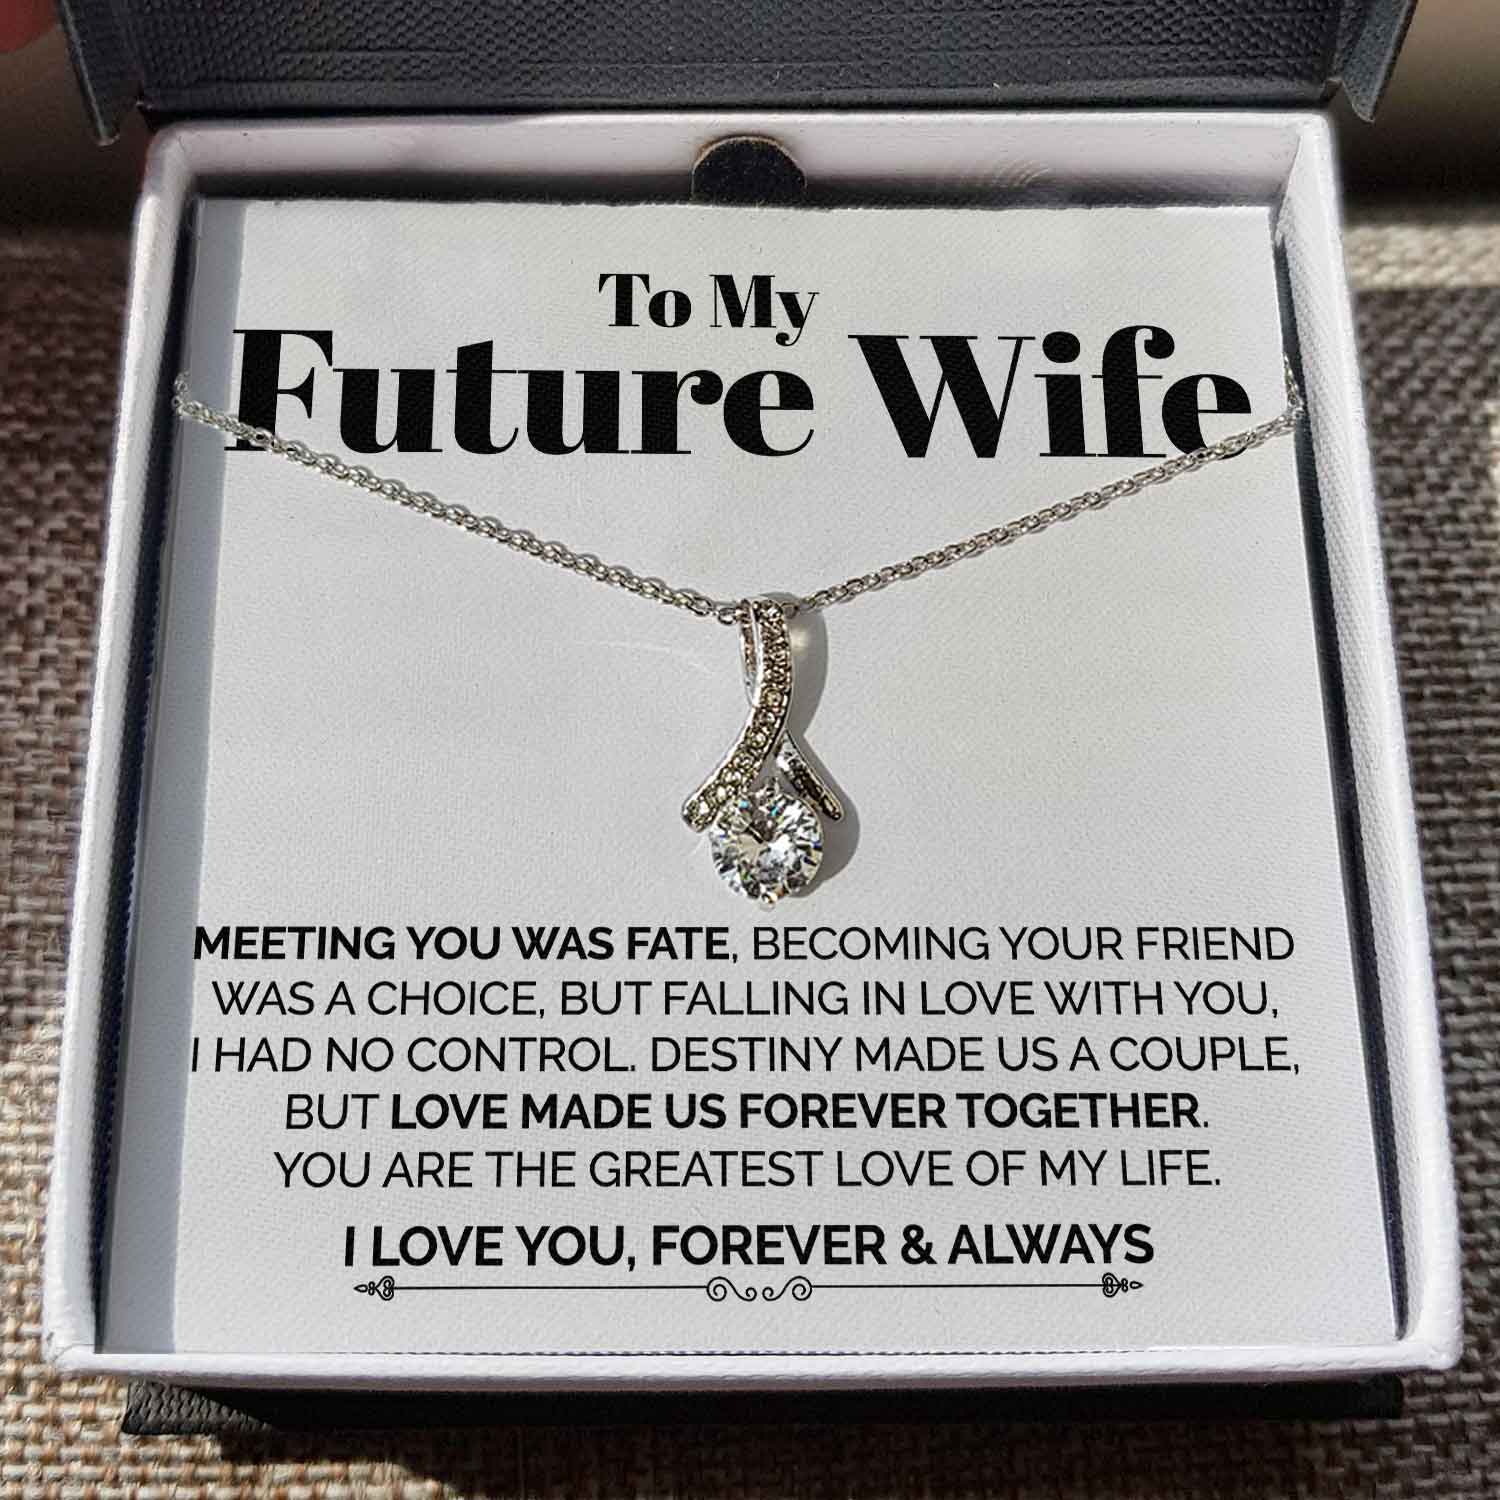 ShineOn Fulfillment Jewelry Standard Box To My Future Wife - Love Made Us Forever Together - Ribbon Necklace